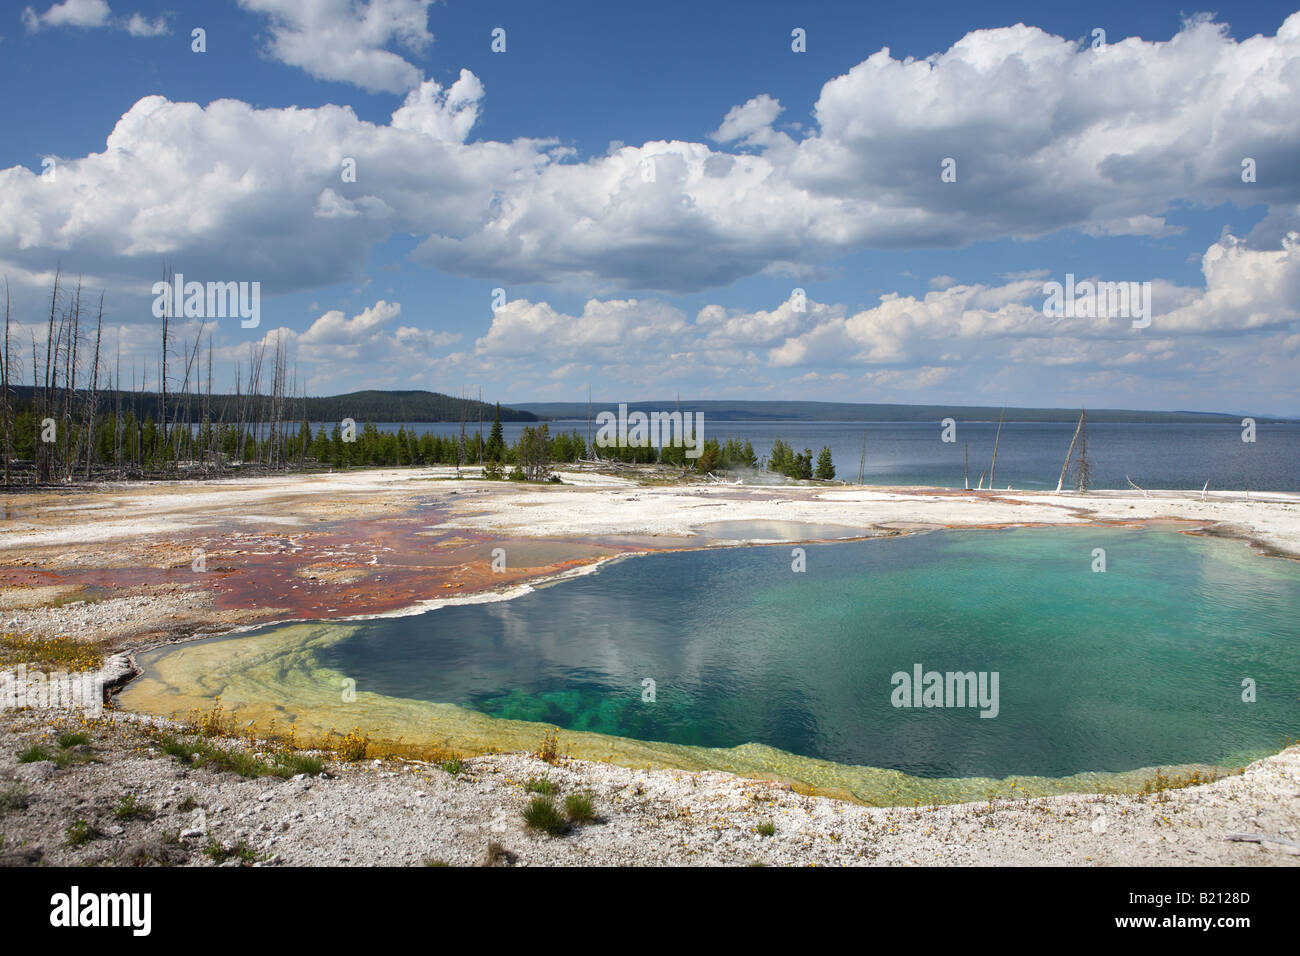 Abyss Pool, West Thumb Geyser Basin, Parc National de Yellowstone Banque D'Images